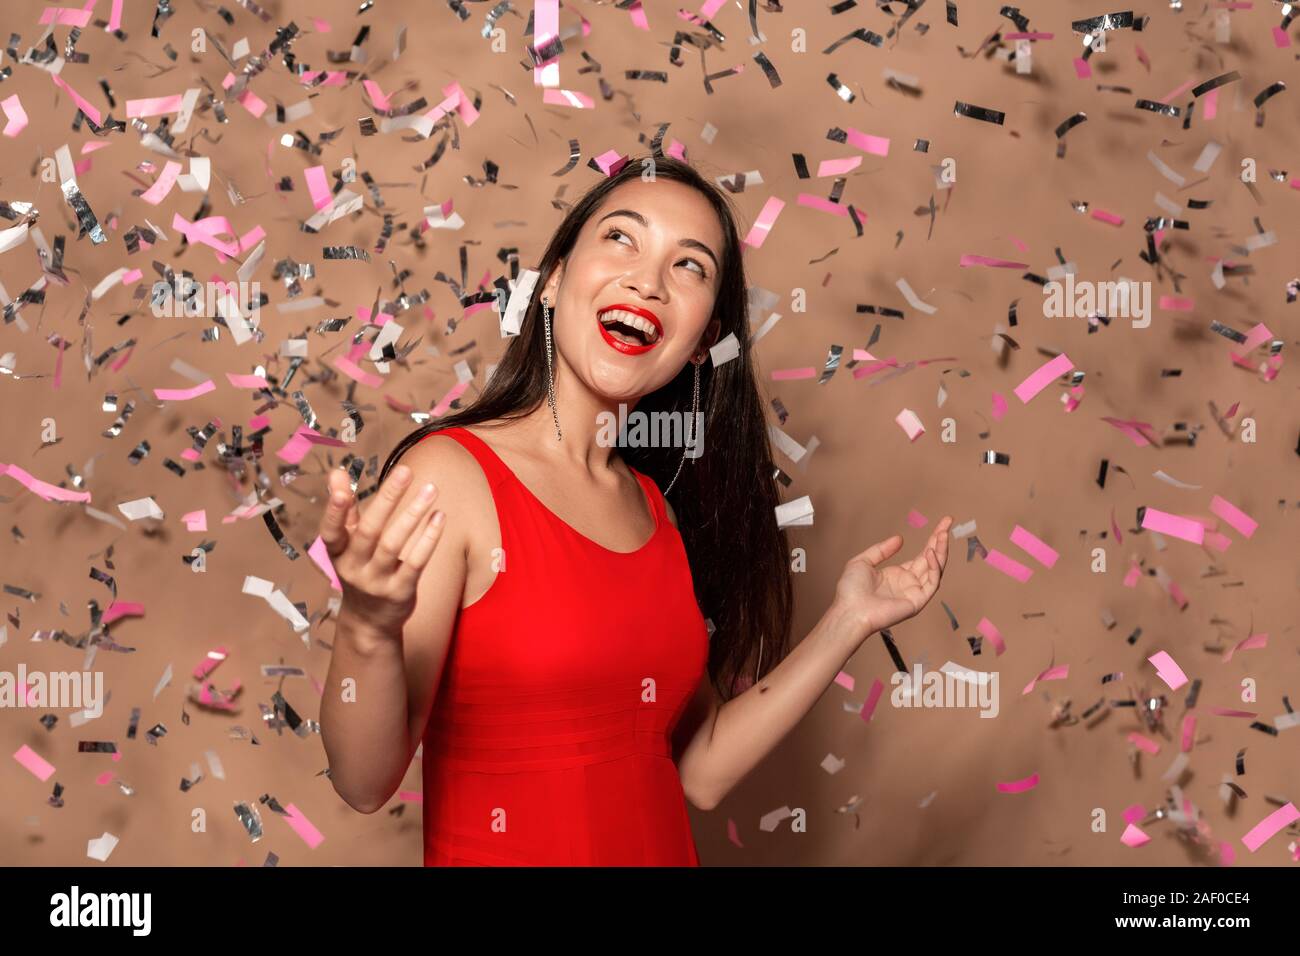 Freestyle. Young girl in dress standing in falling confetti isolated on brown looking up smiling surprised Stock Photo